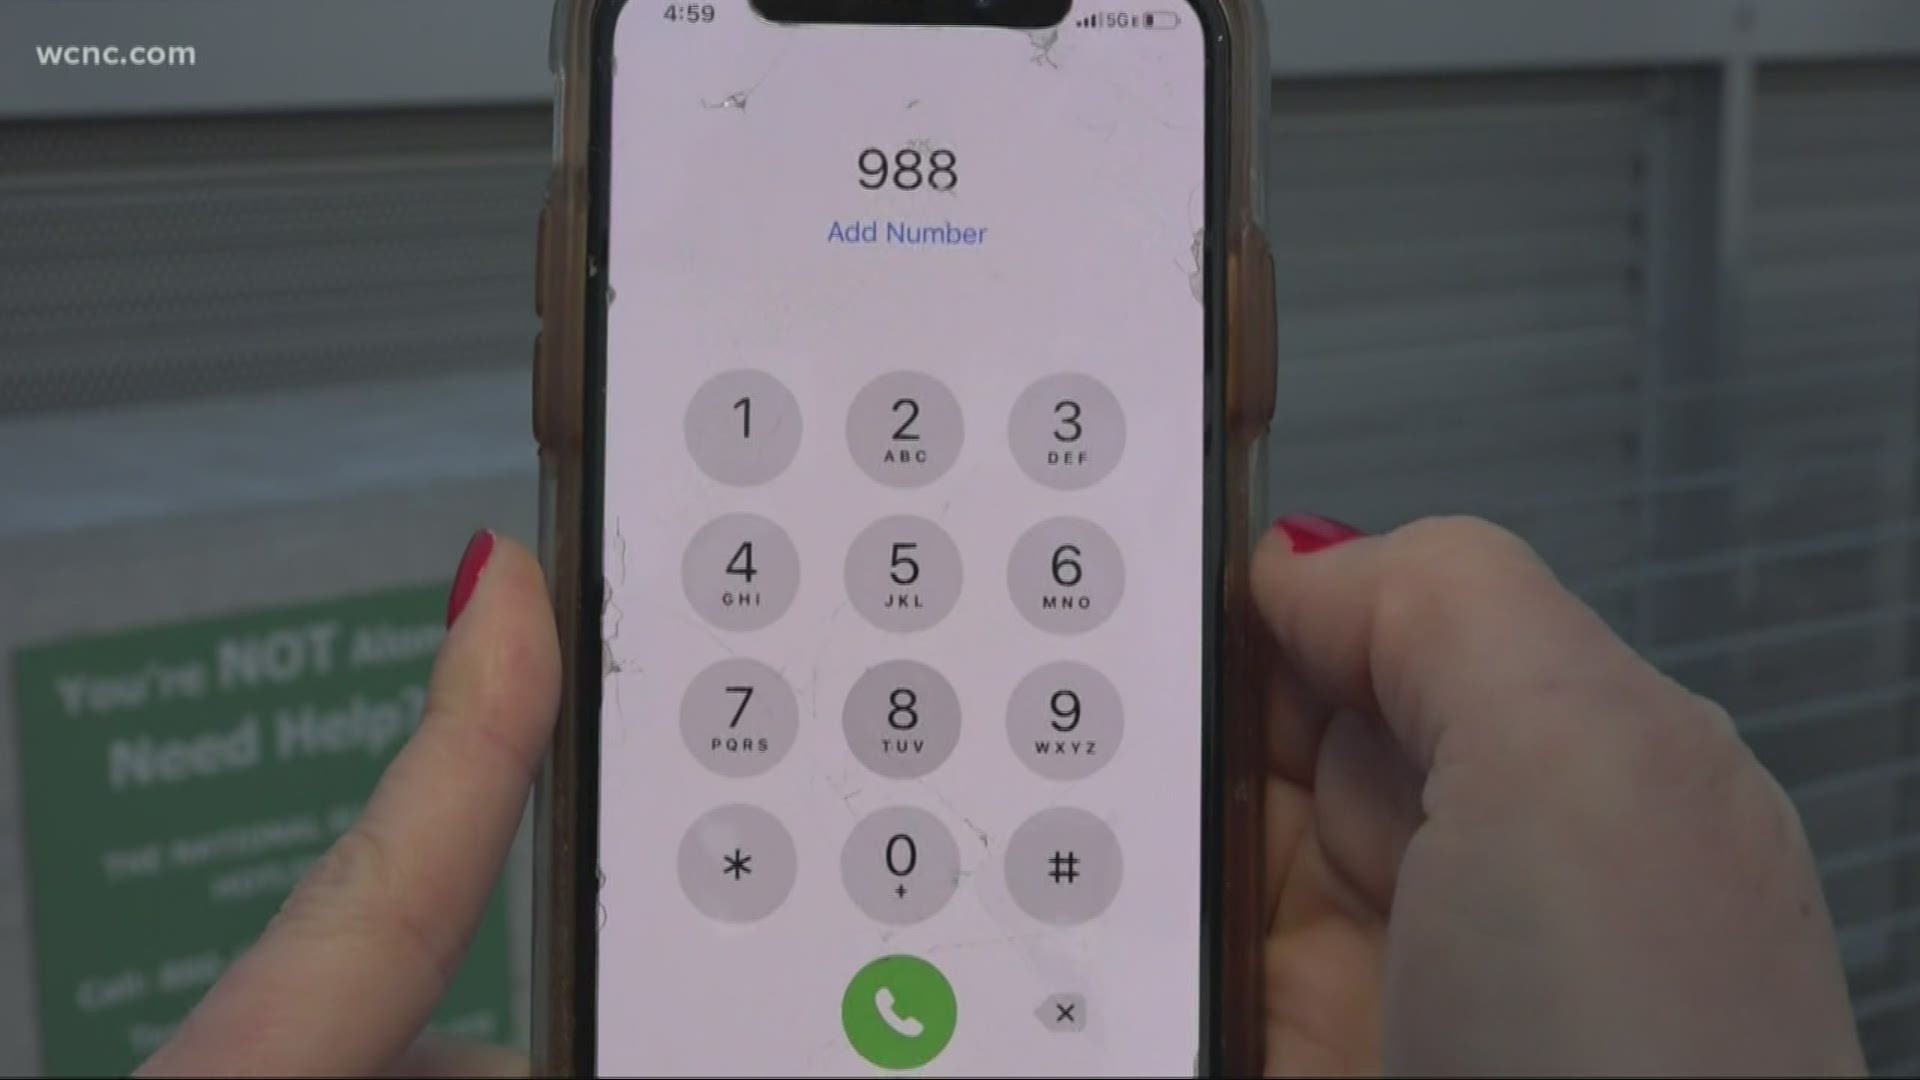 Just as 911 is available to anyone suffering from a physical emergency, the FCC is hoping 988 could be a resource for those suffering from a mental health emergency.